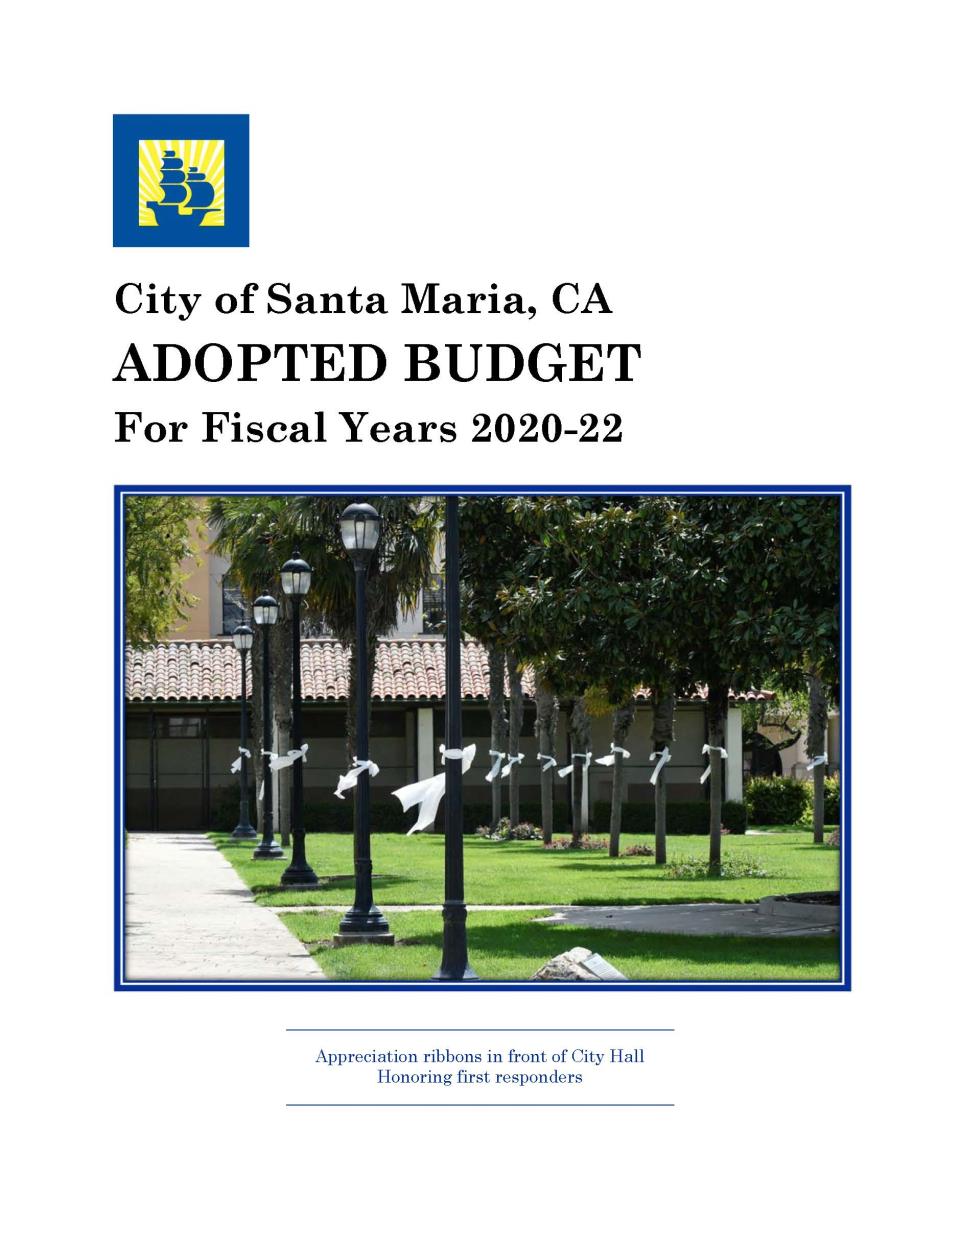 Cover image 2020-22 Budget